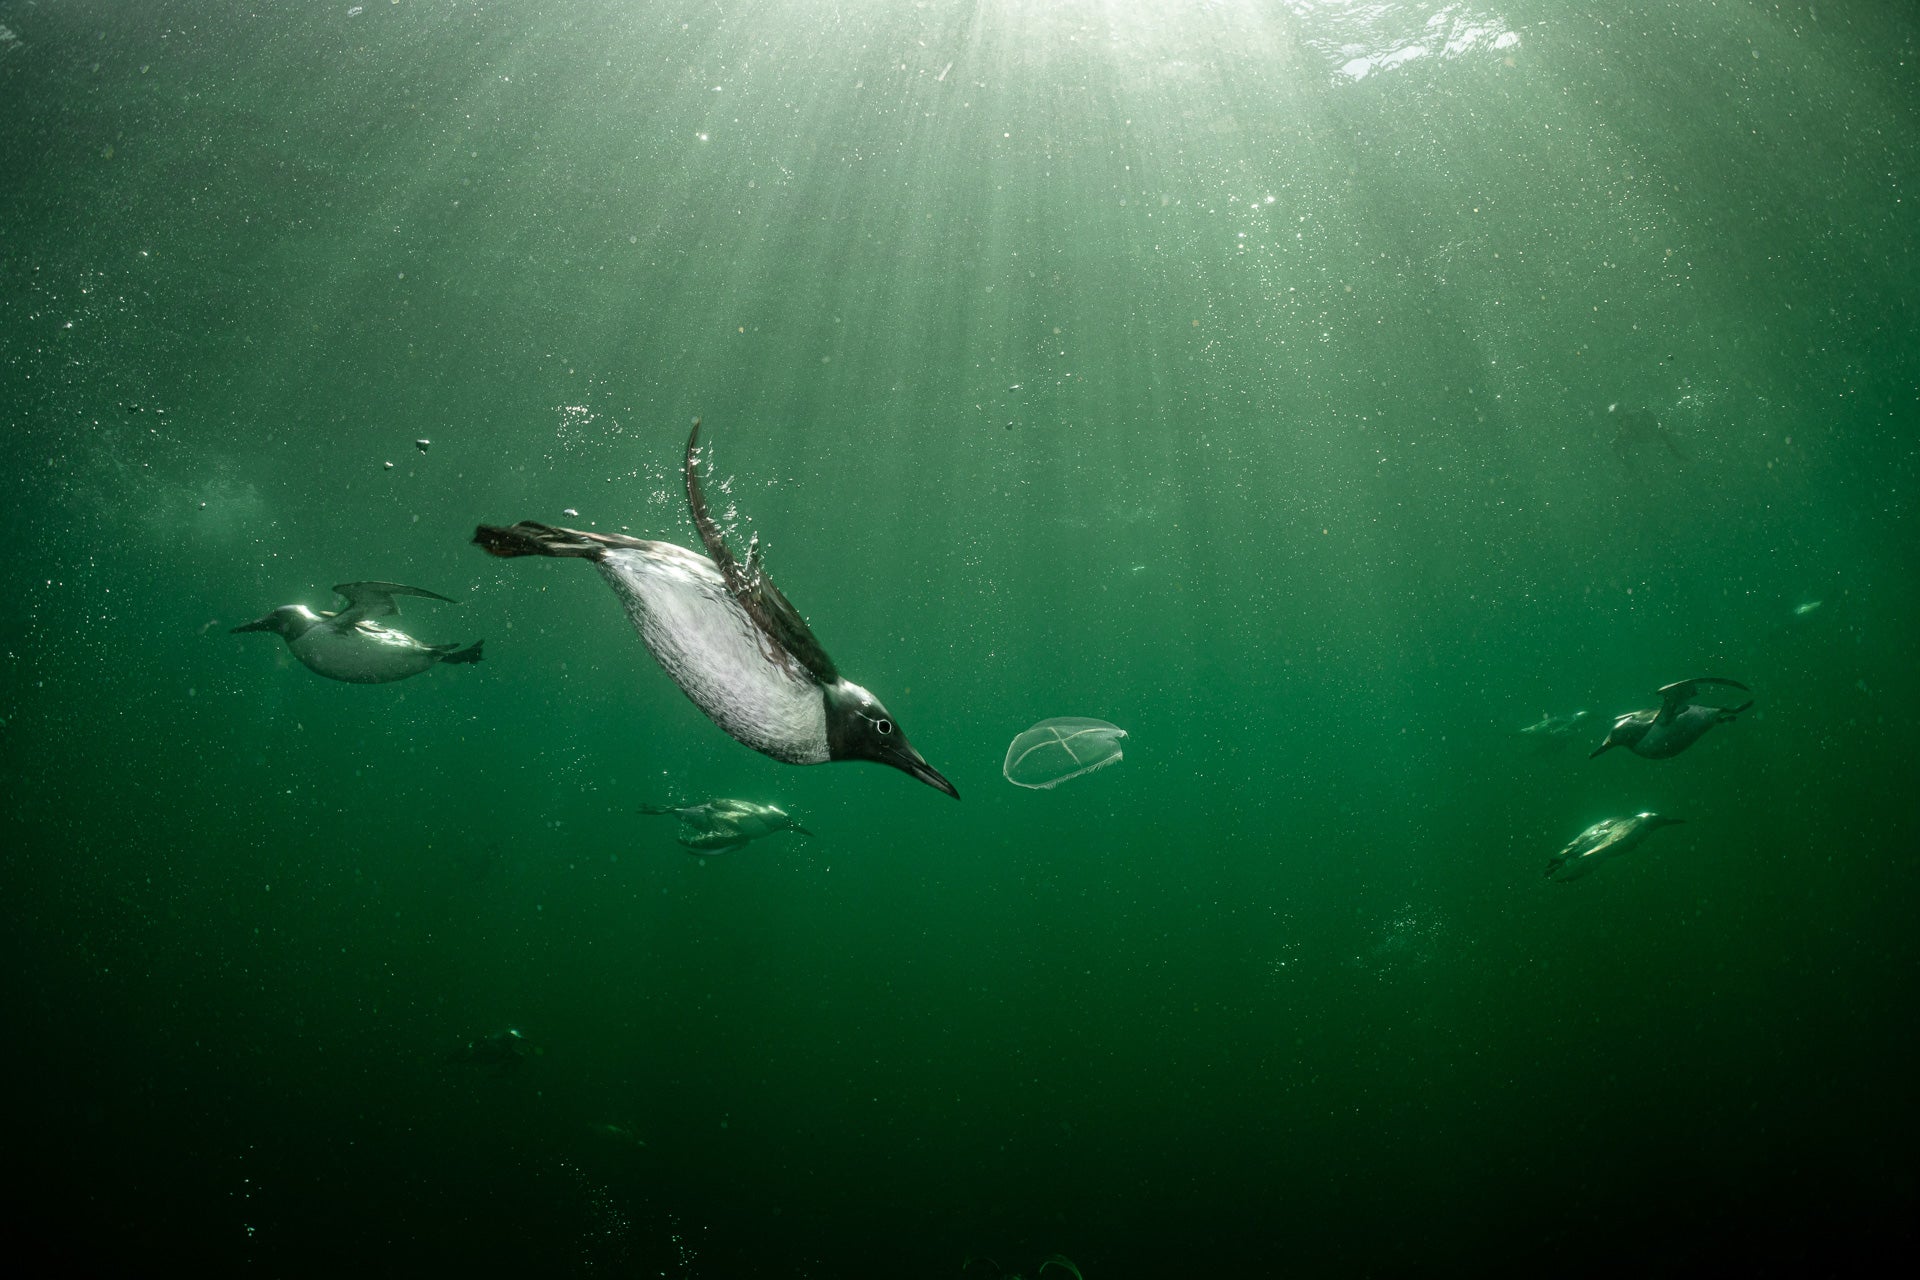 Common murres diving in a Scottish marine preserve. (Photo: Henley Spiers)